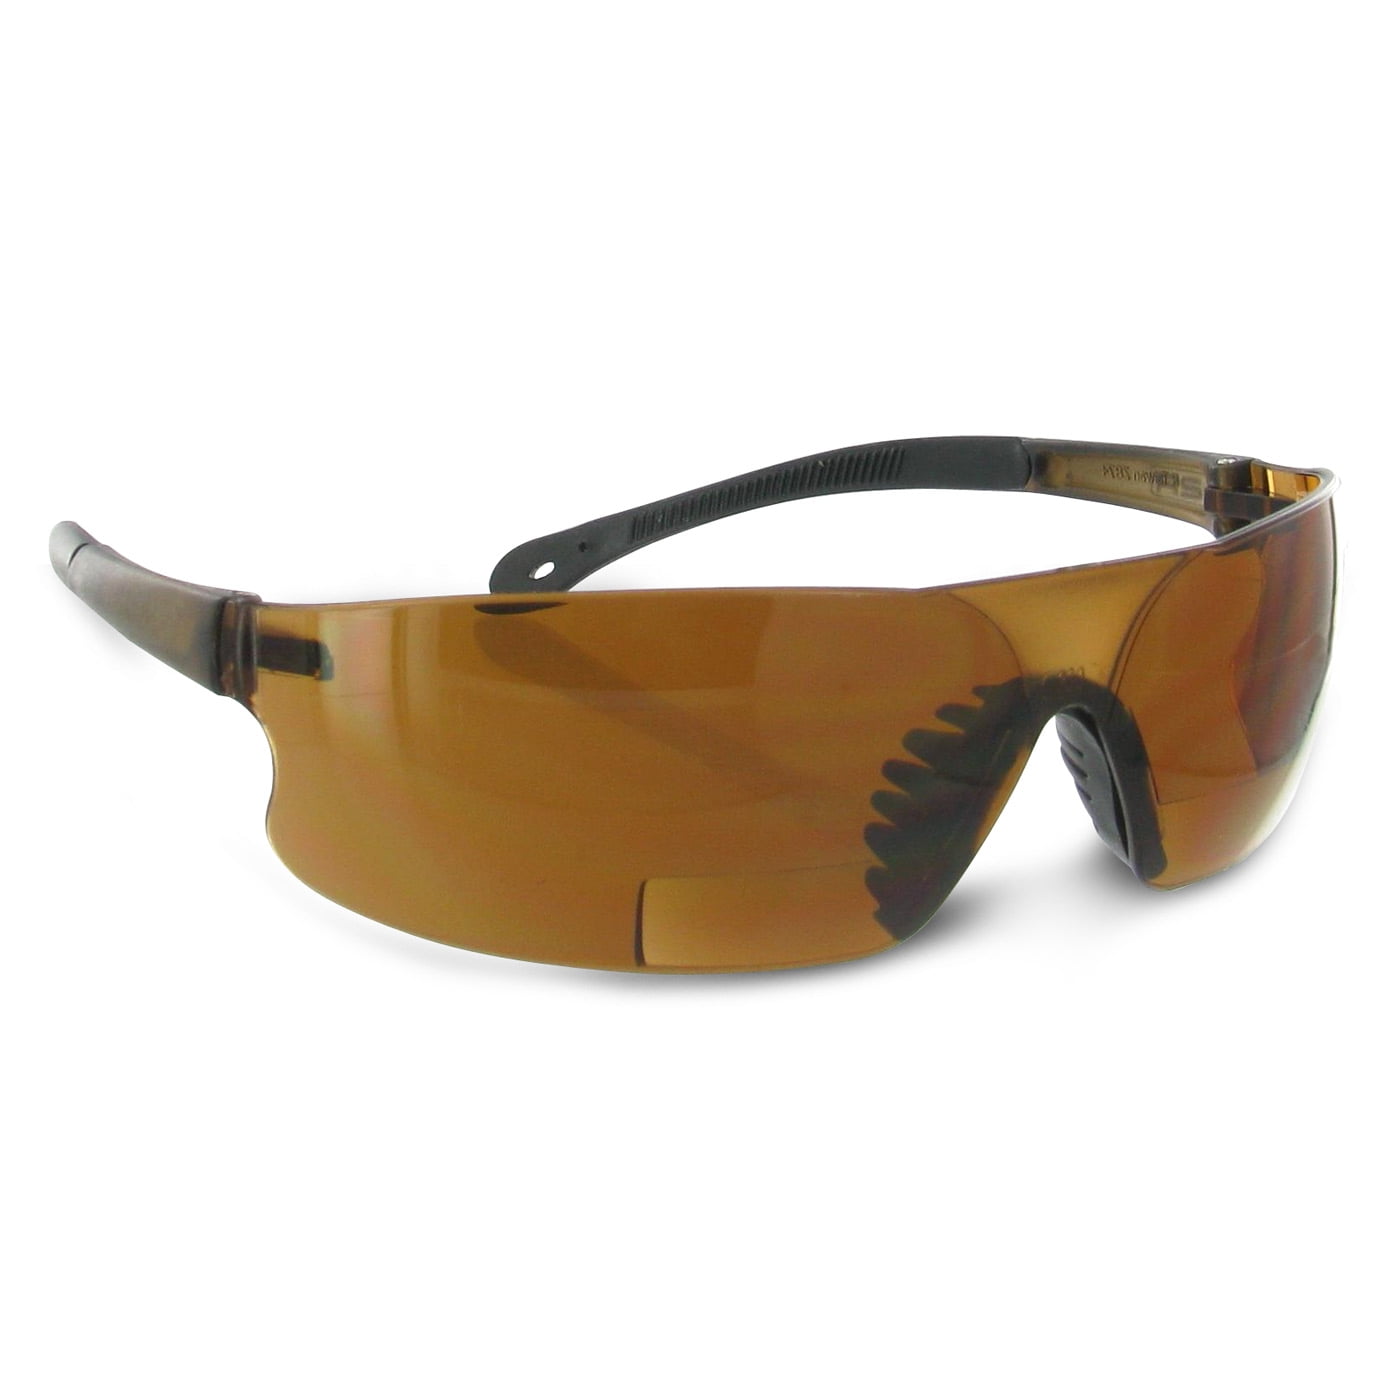 Direct/Indirect-Gray Frame/Clear Anti-Fog Lens Woth Faceshield Attachment 